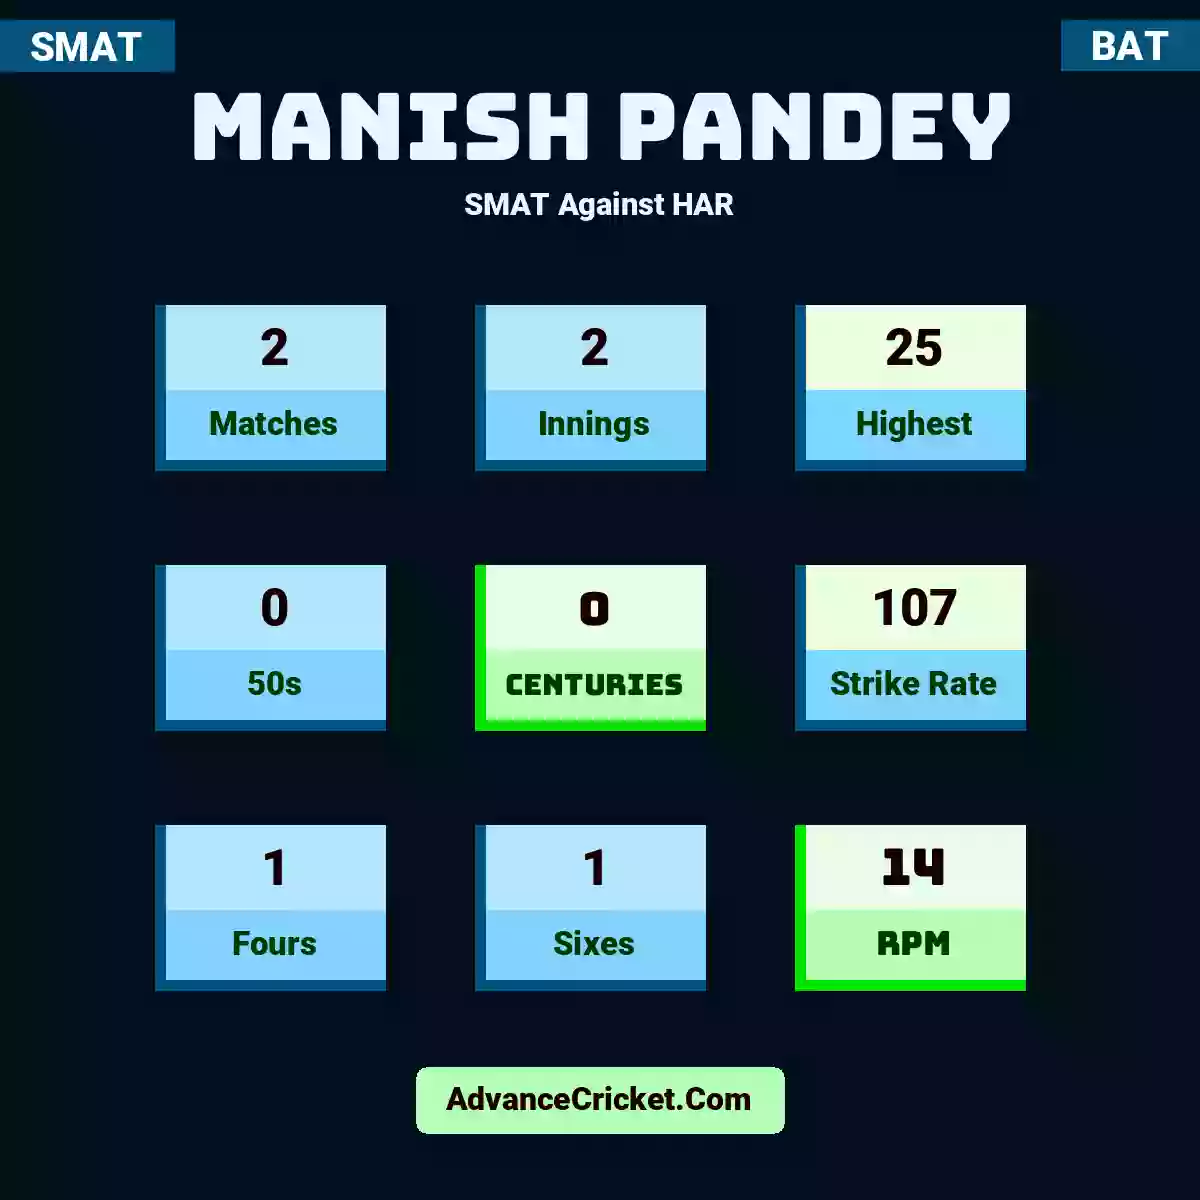 Manish Pandey SMAT  Against HAR, Manish Pandey played 2 matches, scored 25 runs as highest, 0 half-centuries, and 0 centuries, with a strike rate of 107. M.Pandey hit 1 fours and 1 sixes, with an RPM of 14.